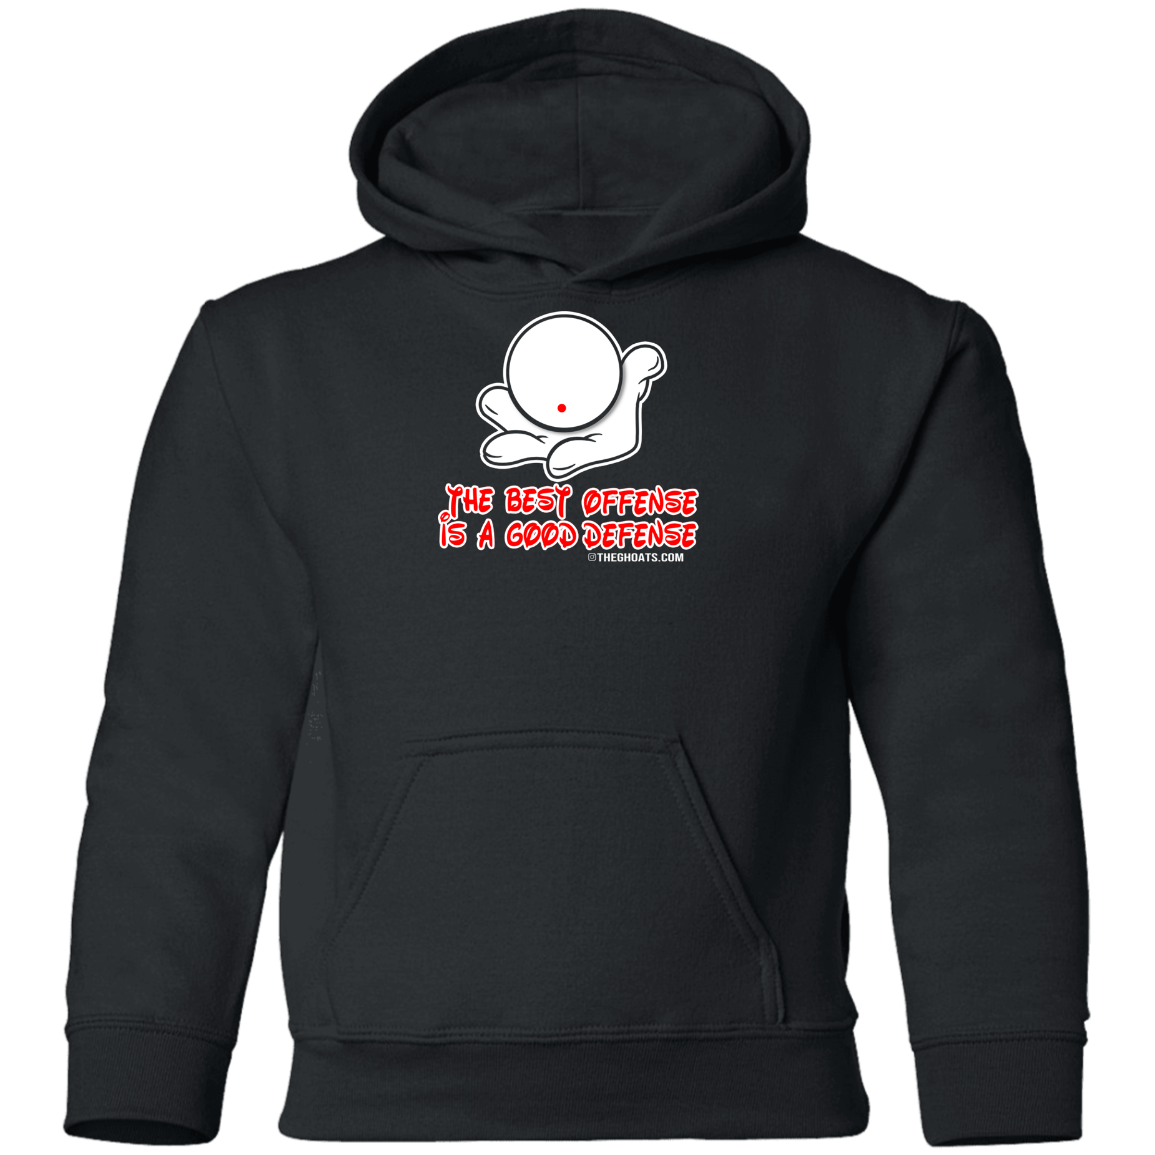 The GHOATS Custom Design #5. The Best Offense is a Good Defense. Youth Pullover Hoodie